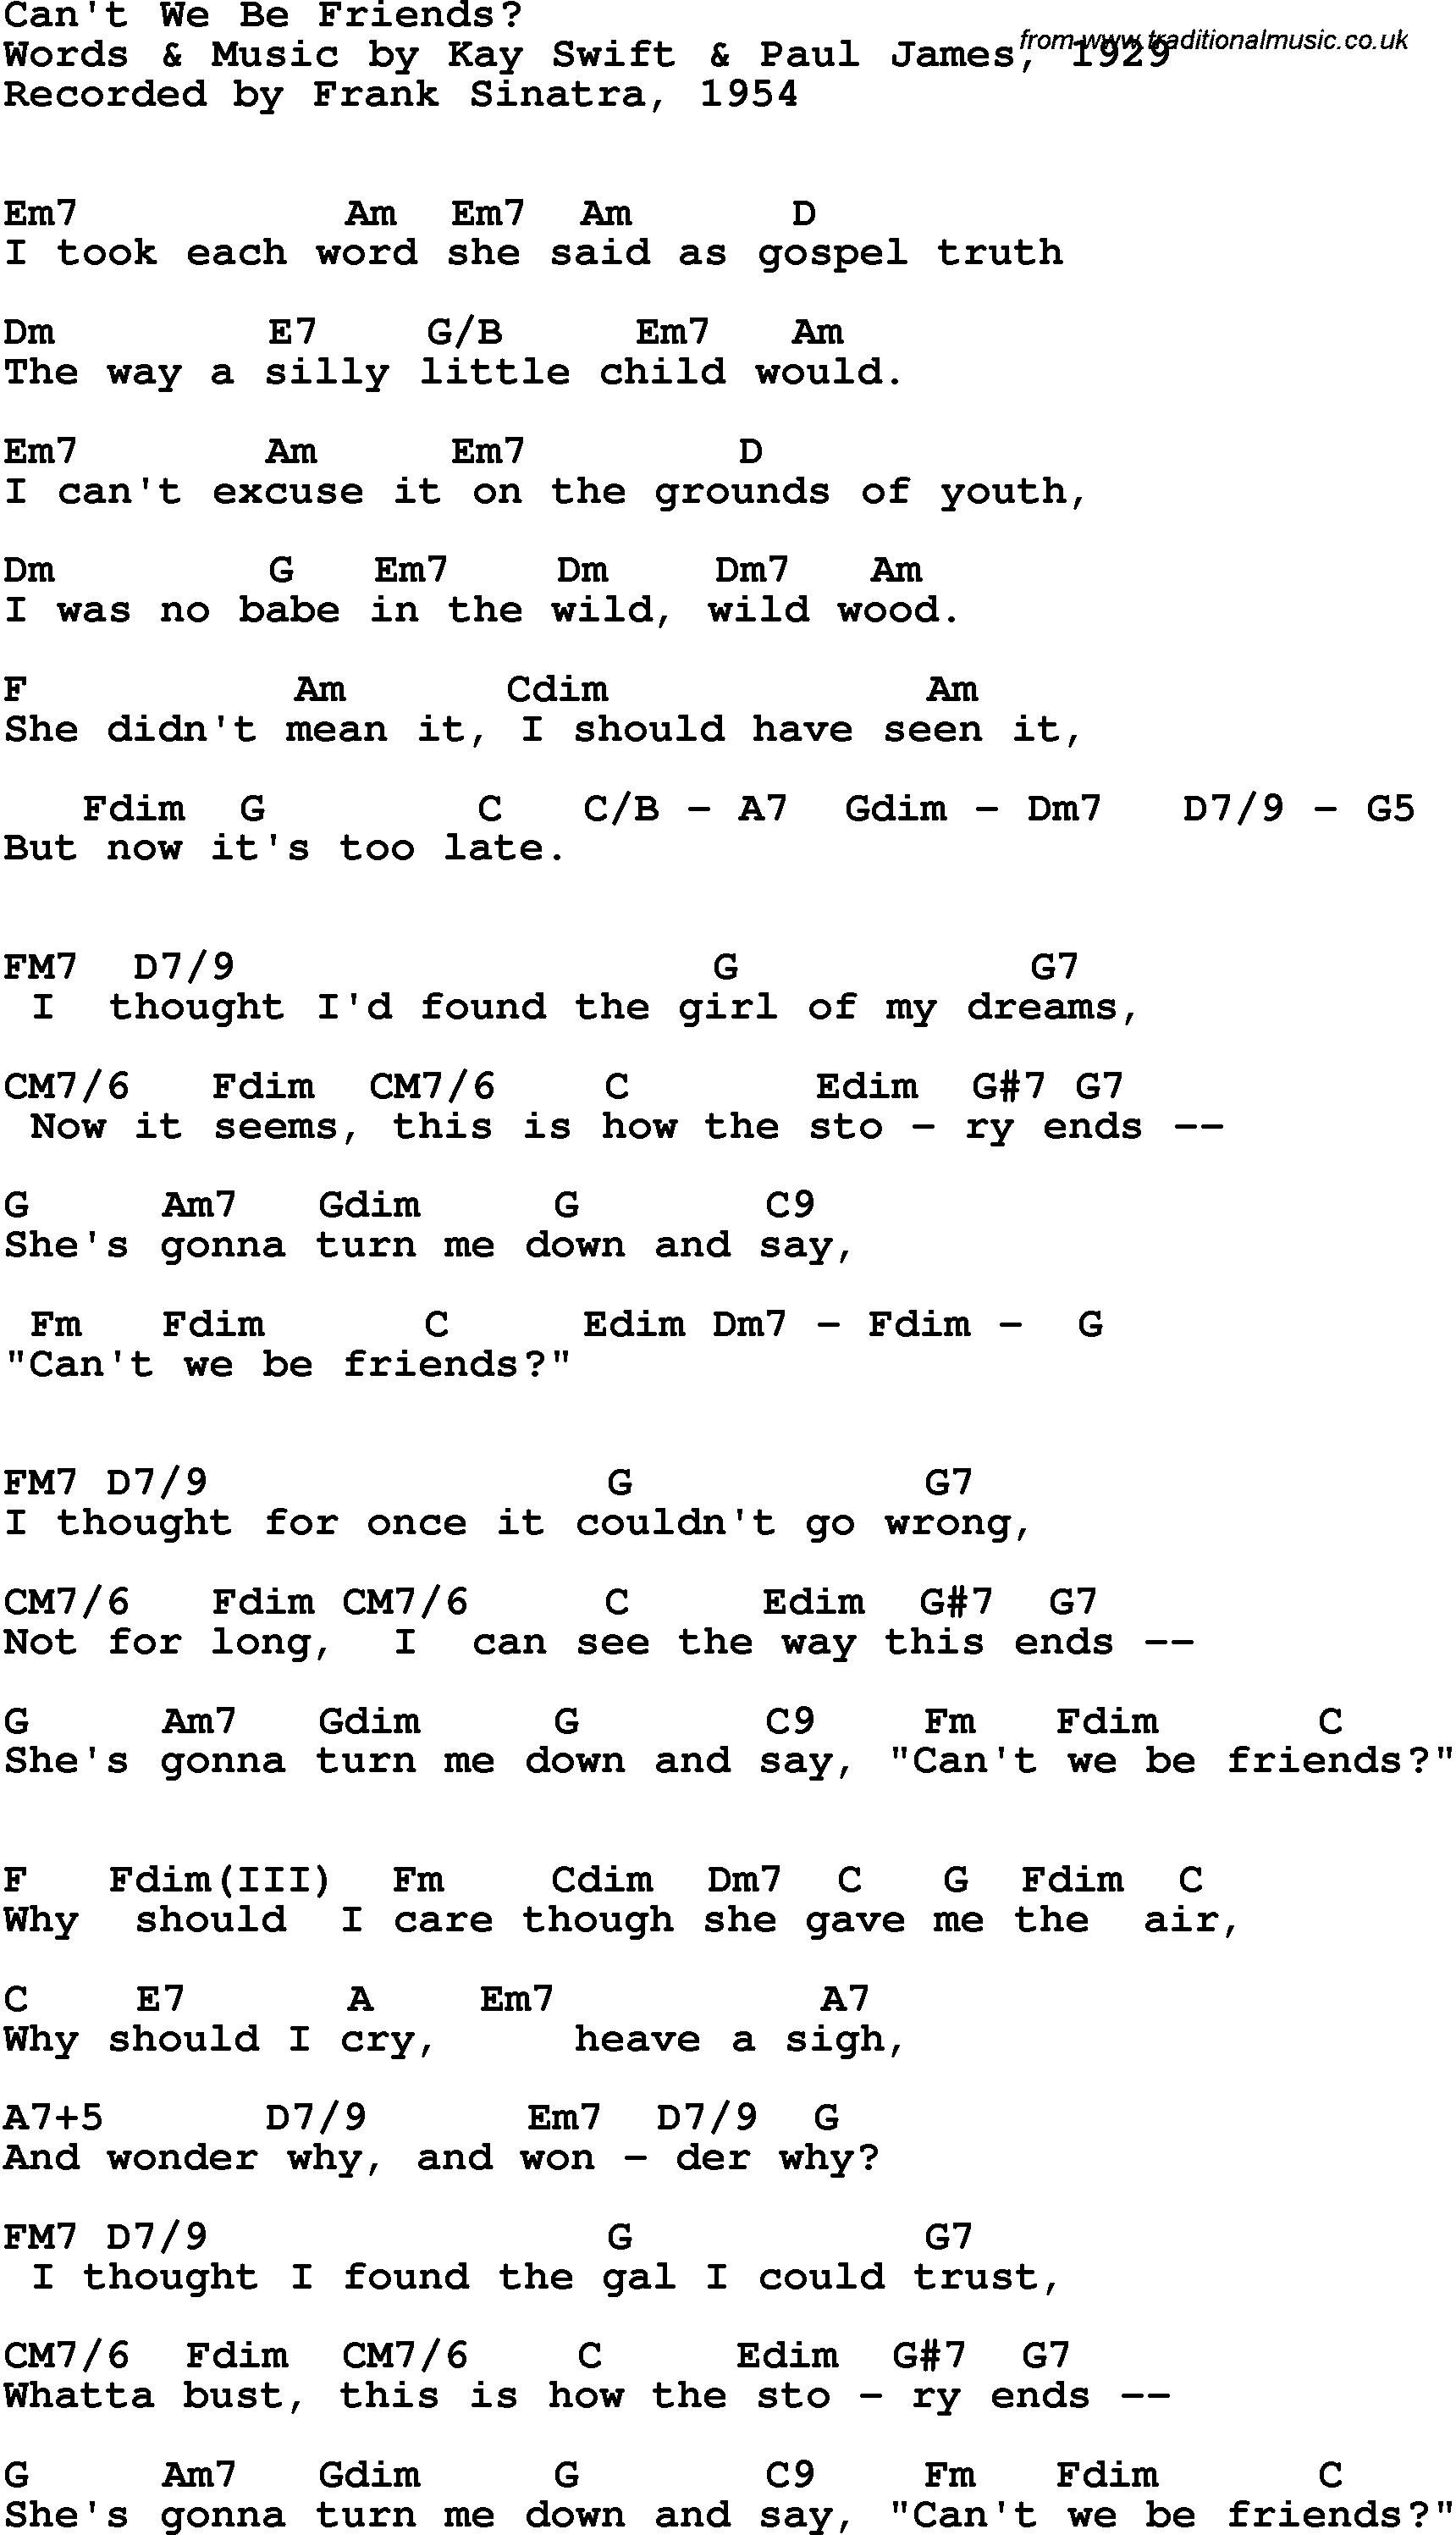 Song Lyrics with guitar chords for Can't We Be Friends - Frank Sinatra, 1954